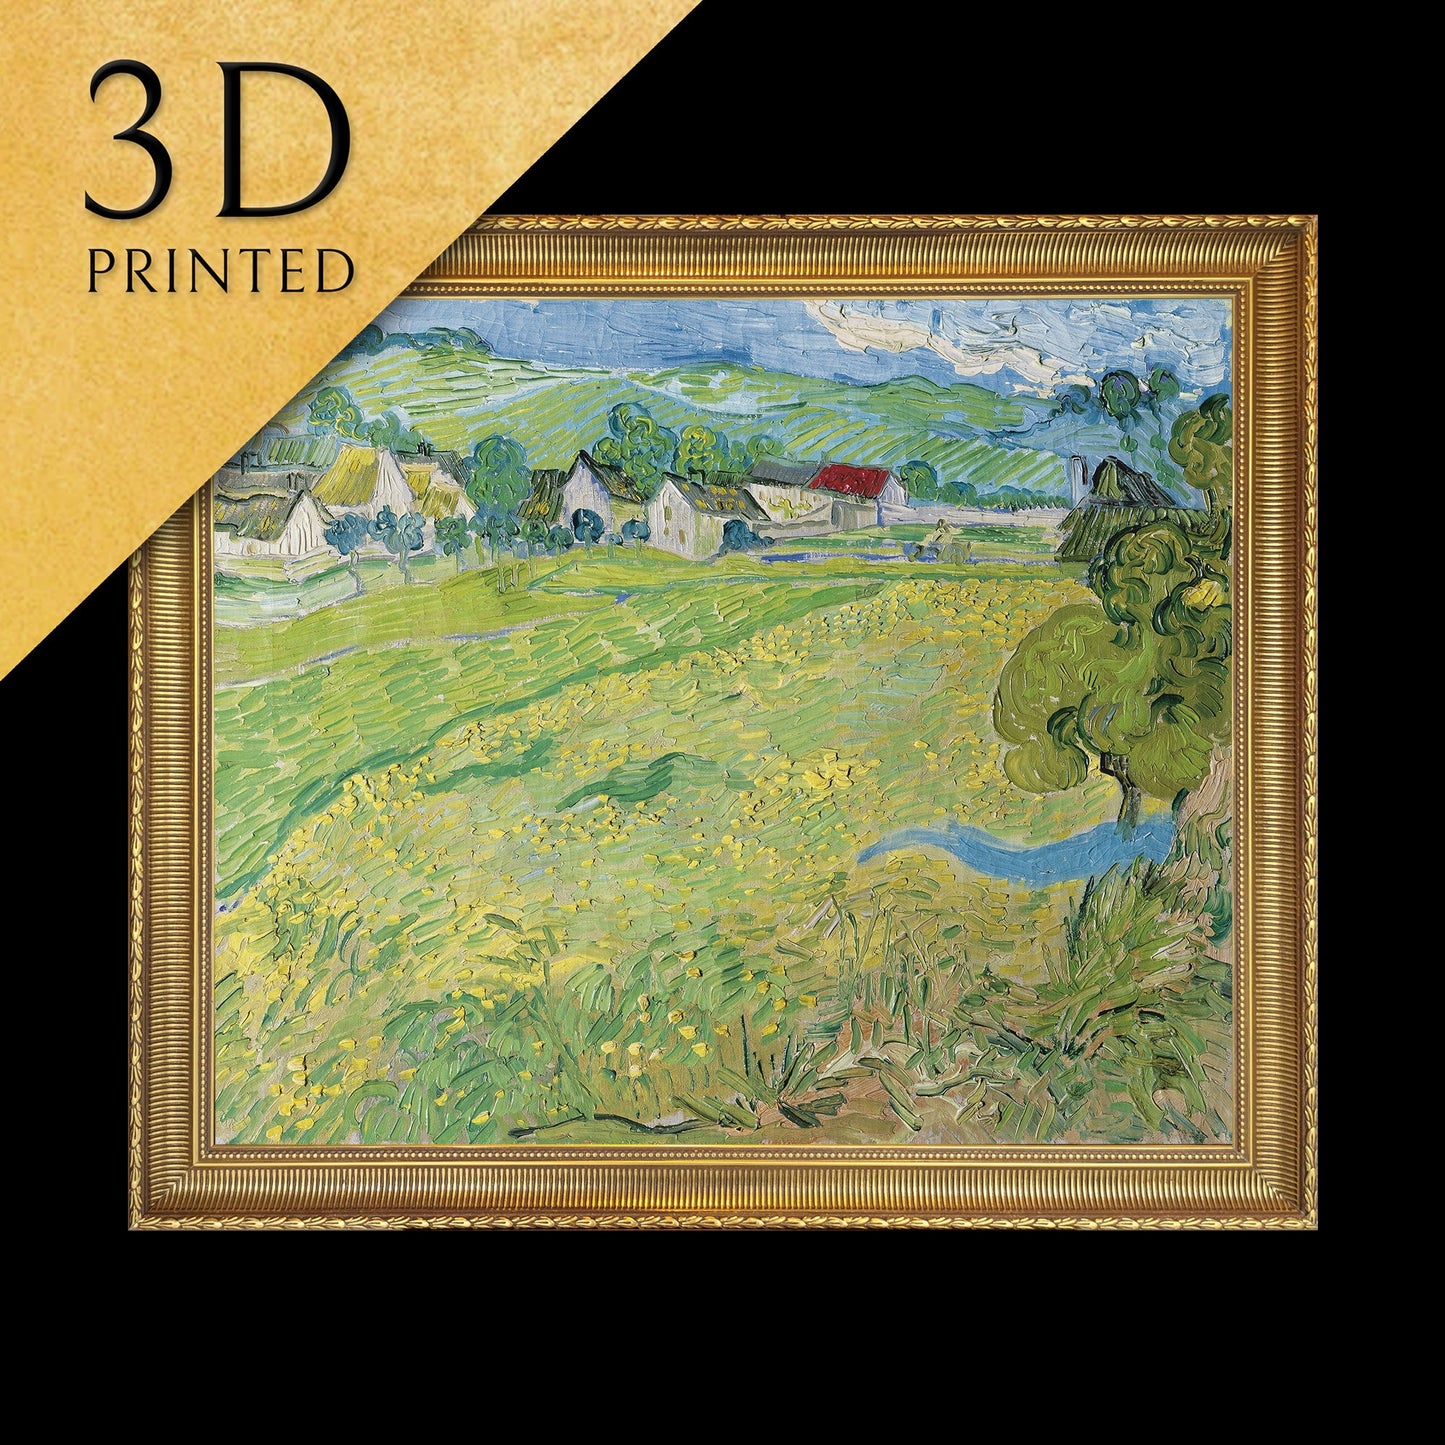 Les Vessenots in Auvers by Vincent Van Gogh, 3d Printed with texture and brush strokes looks like original oil-painting, code:141